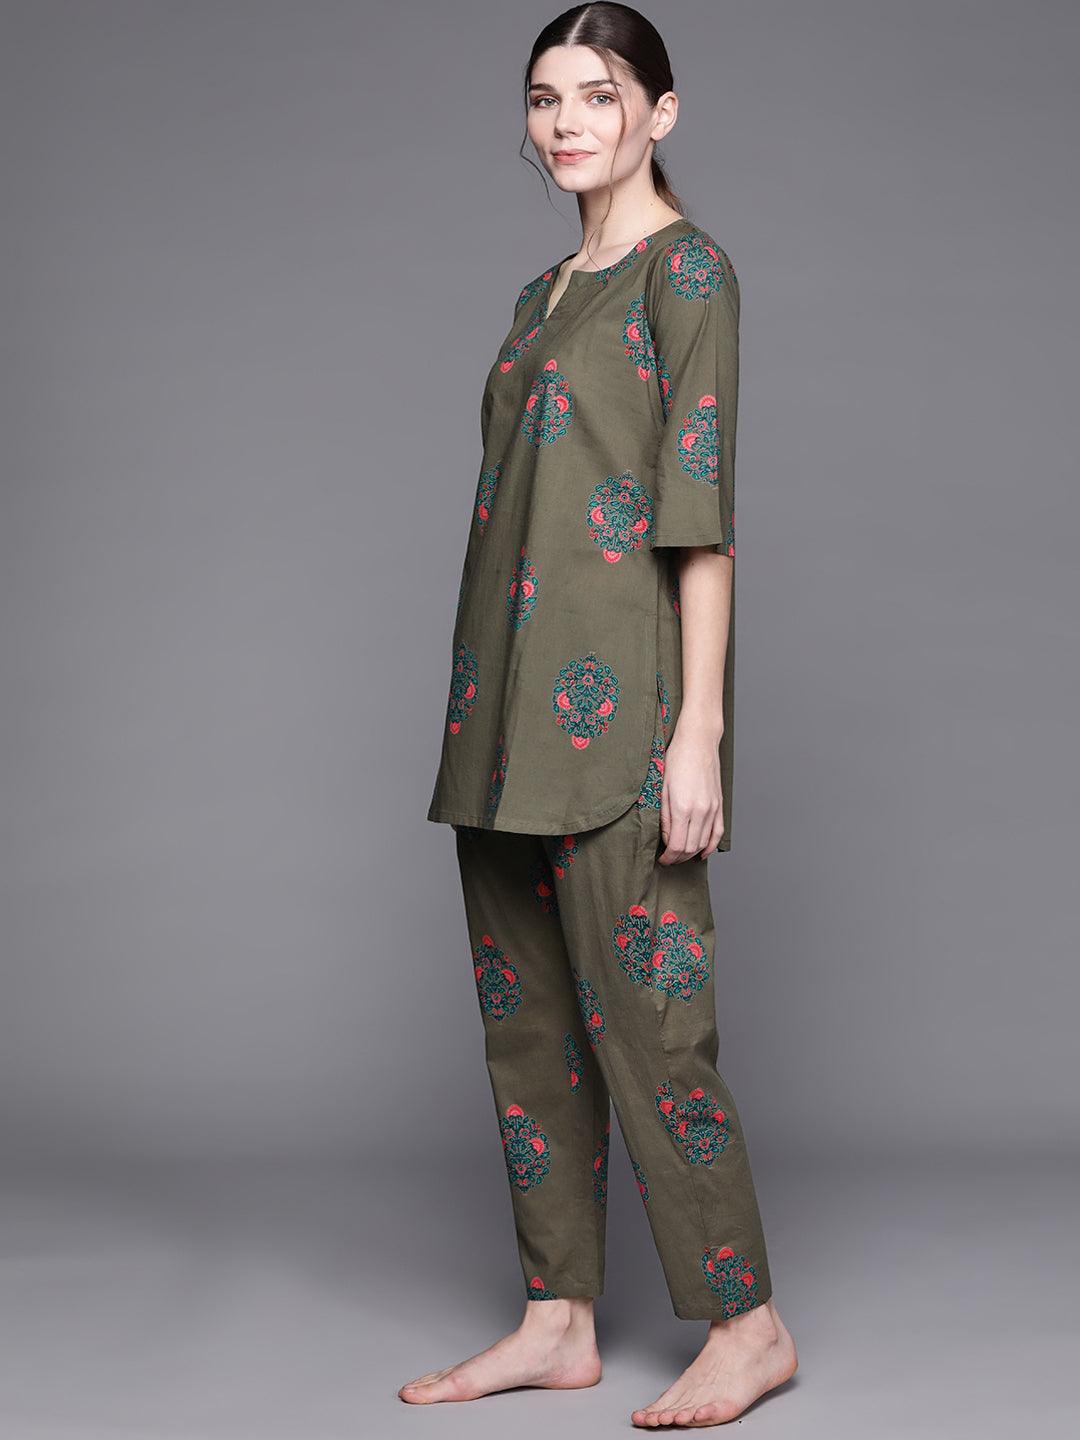 Olive Printed Cotton Night Suit - Libas